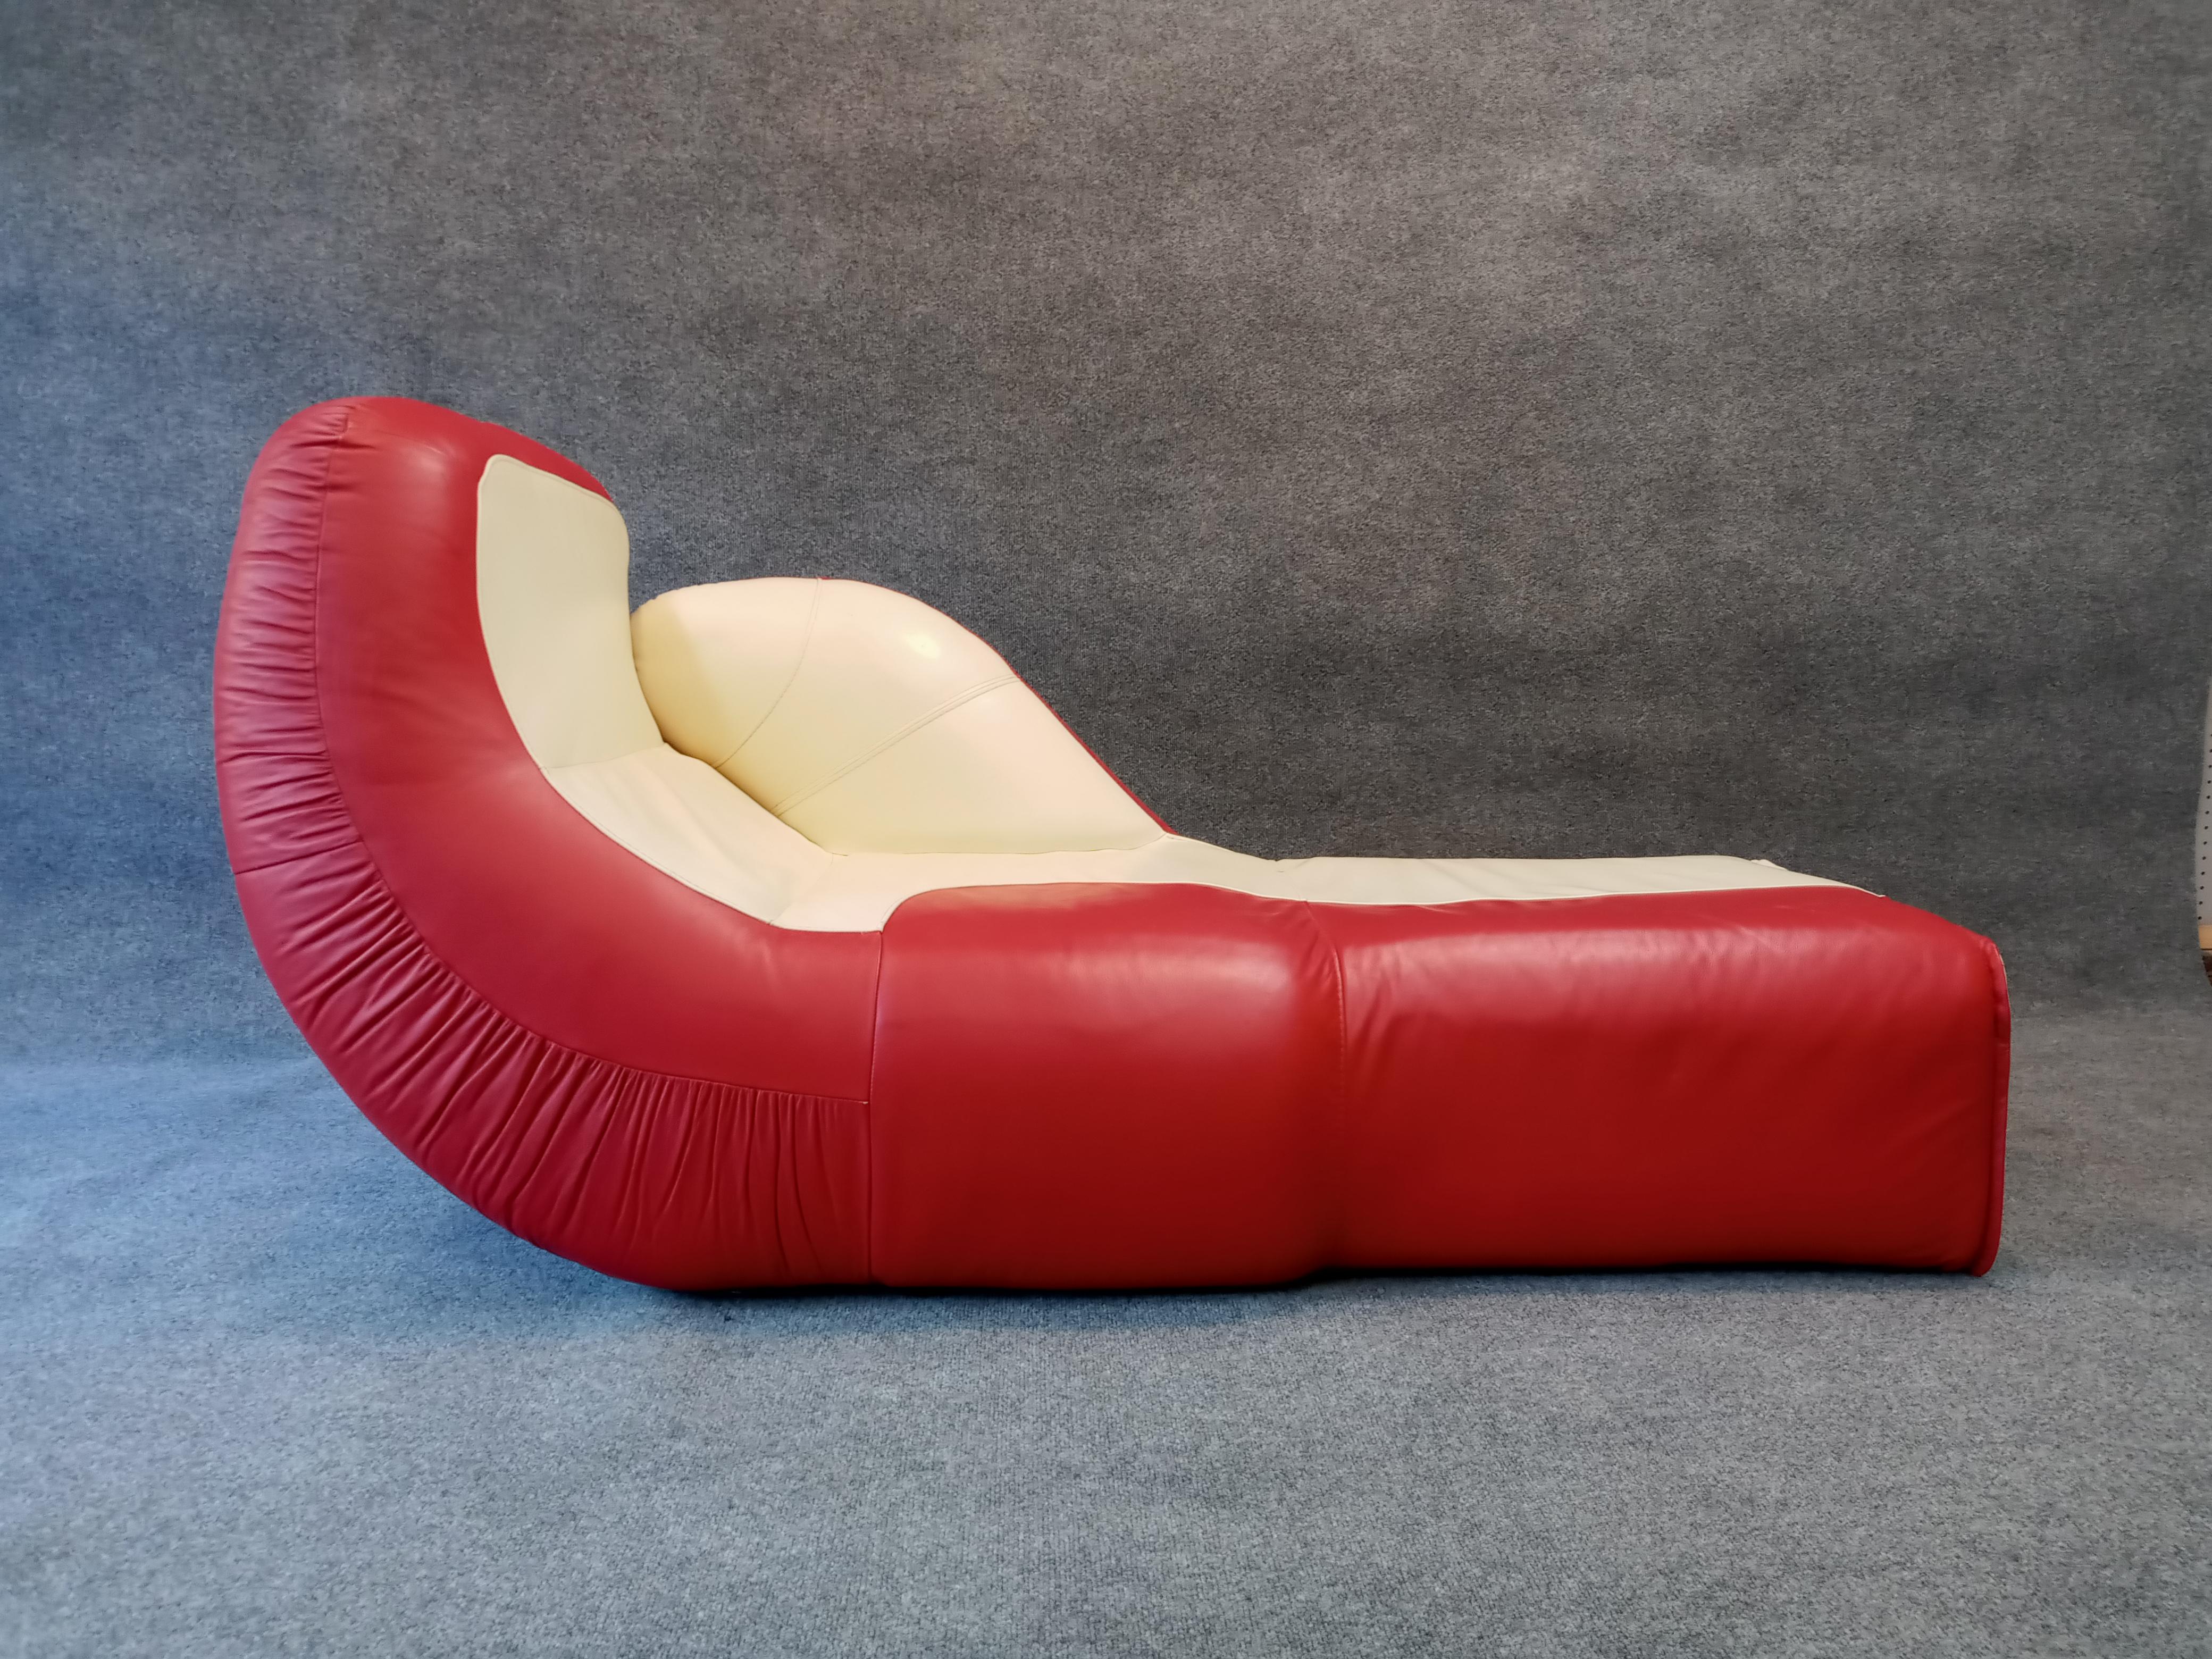 In bright red and off-white leather, this chaise lounge is in very good vintage and original condition. A sturdy and well-made piece, it is both comfortable and packs a visual punch.